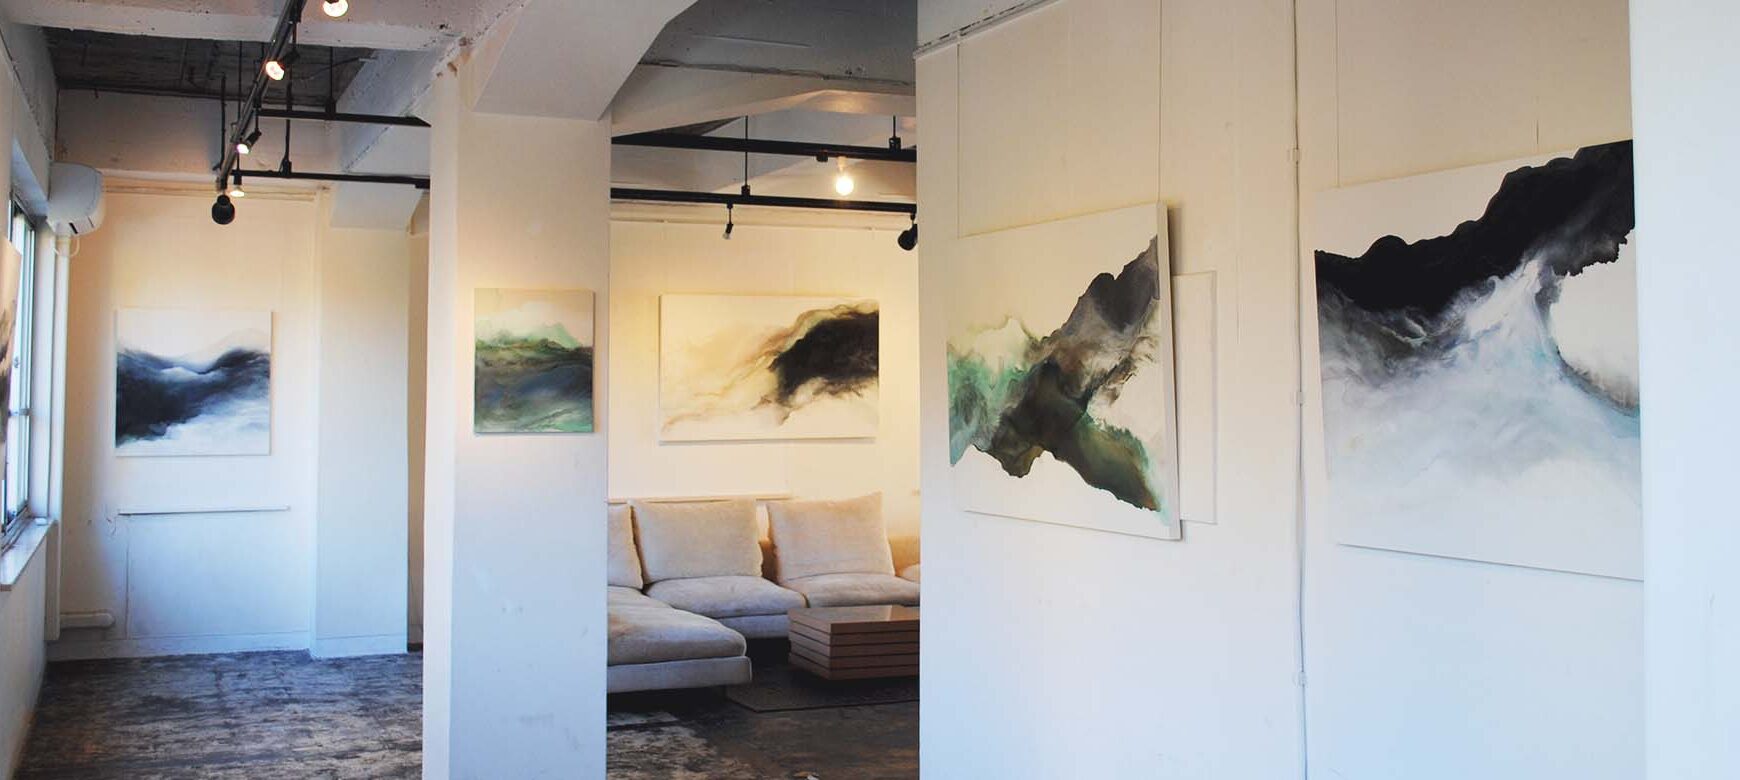 Saori Masuda Solo Exhibition “Landscape” is being held now.